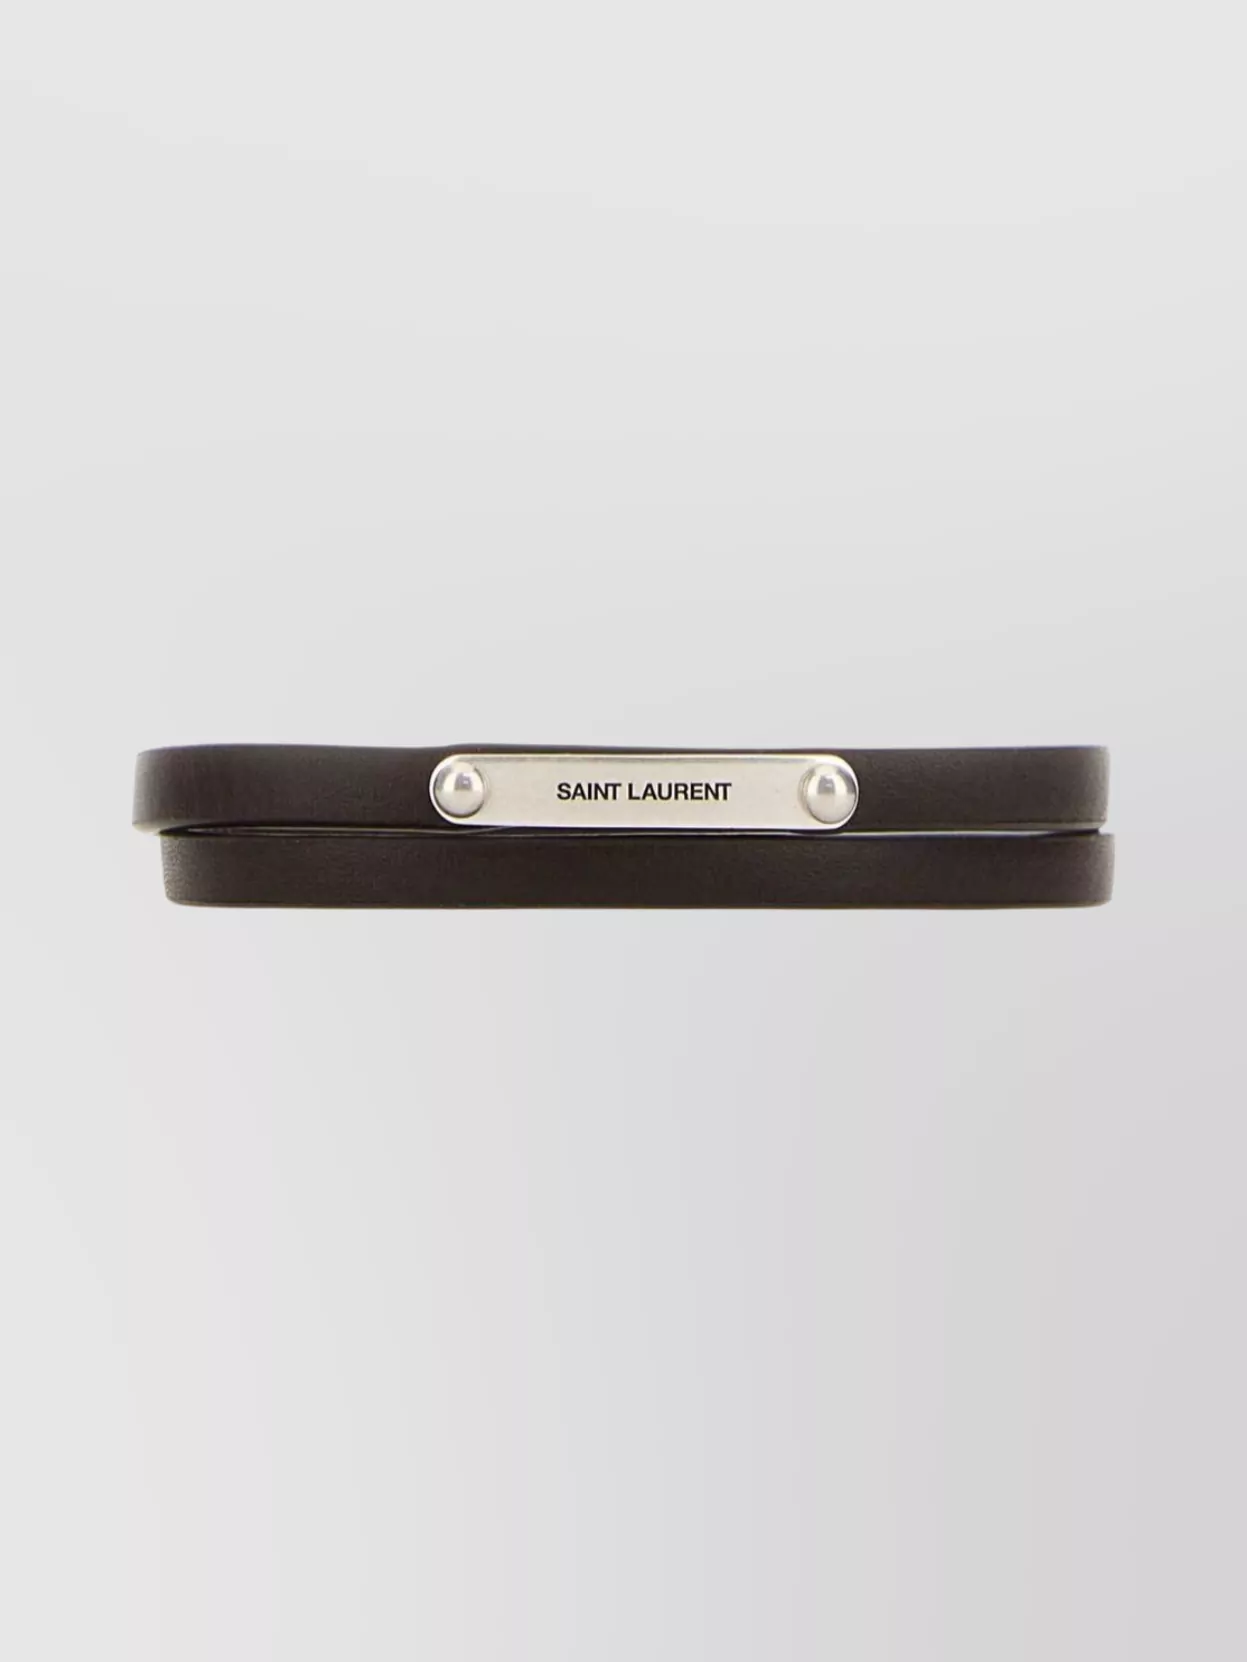 Shop Saint Laurent Leather Id Wristband Featuring Metal Accents